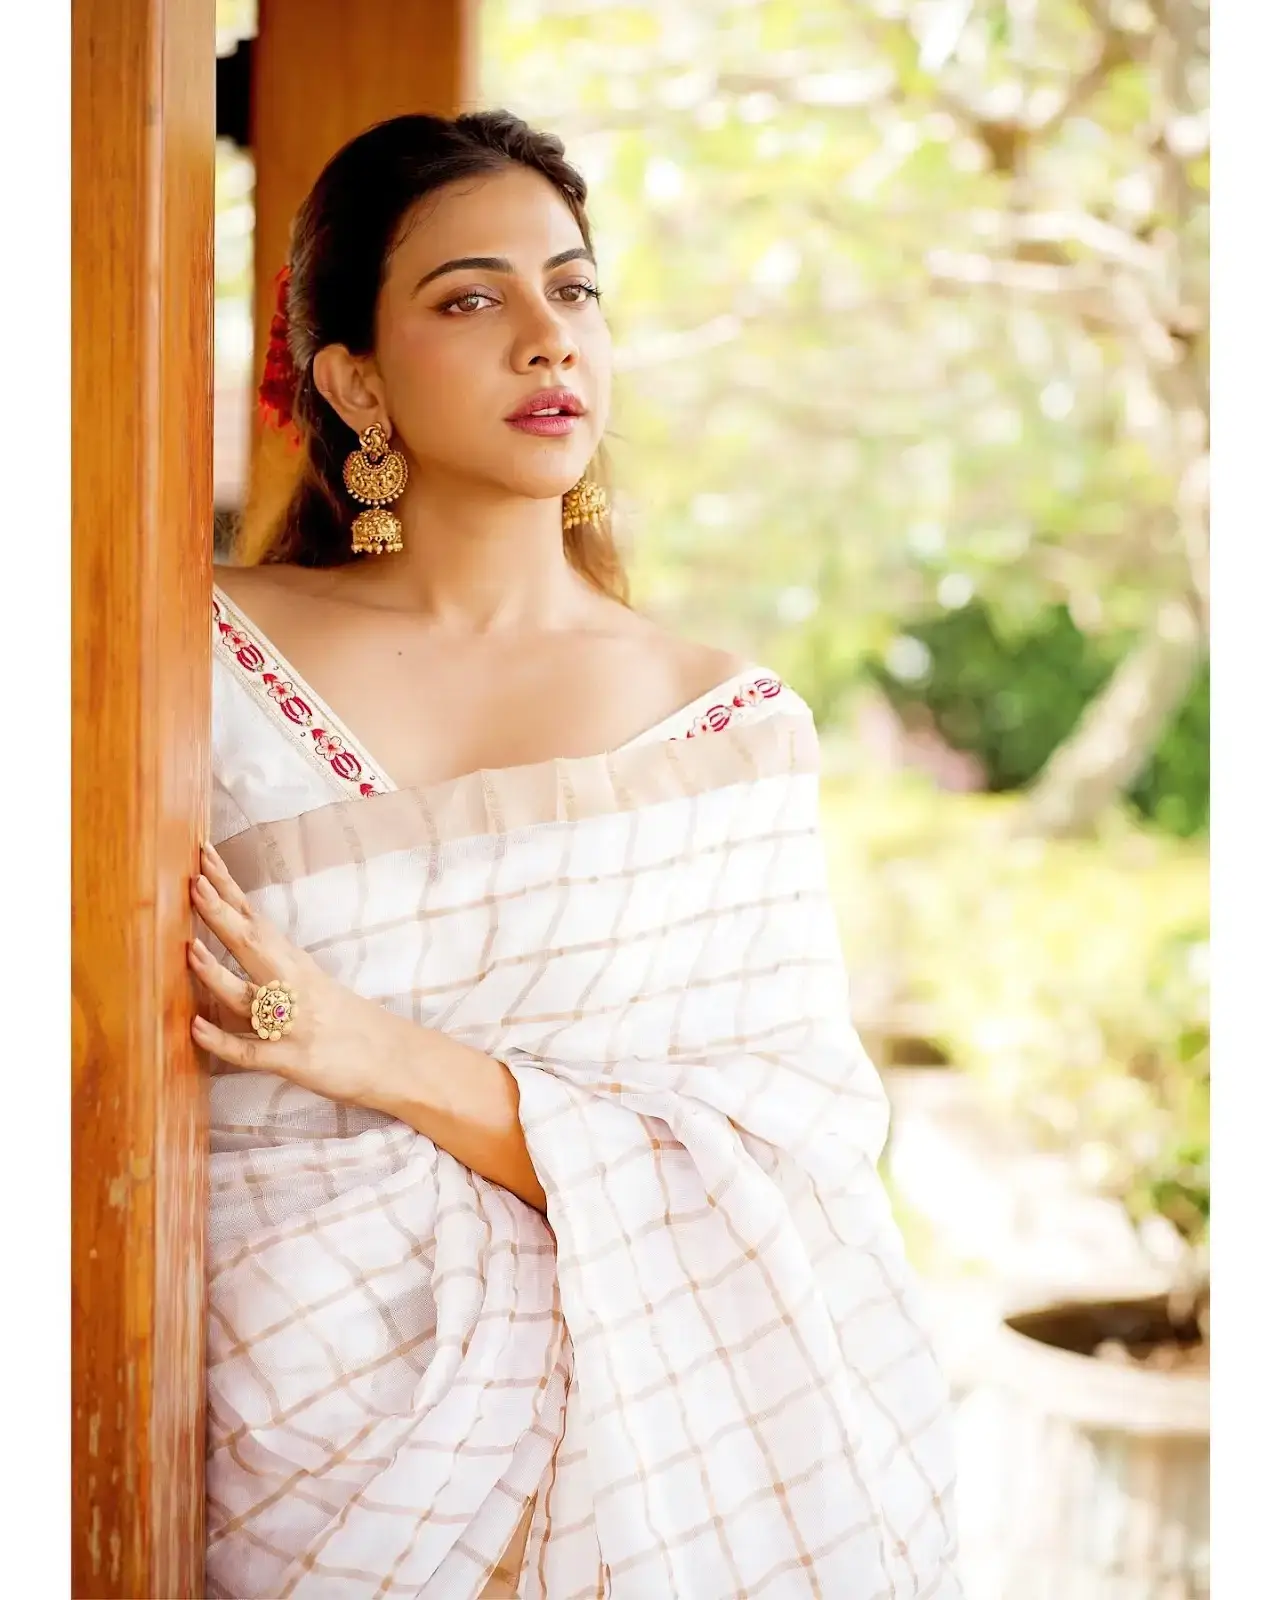 INDIAN GIRL MADONNA SEBASTIAN IMAGES IN TRADITIONAL WHITE SAREE 4